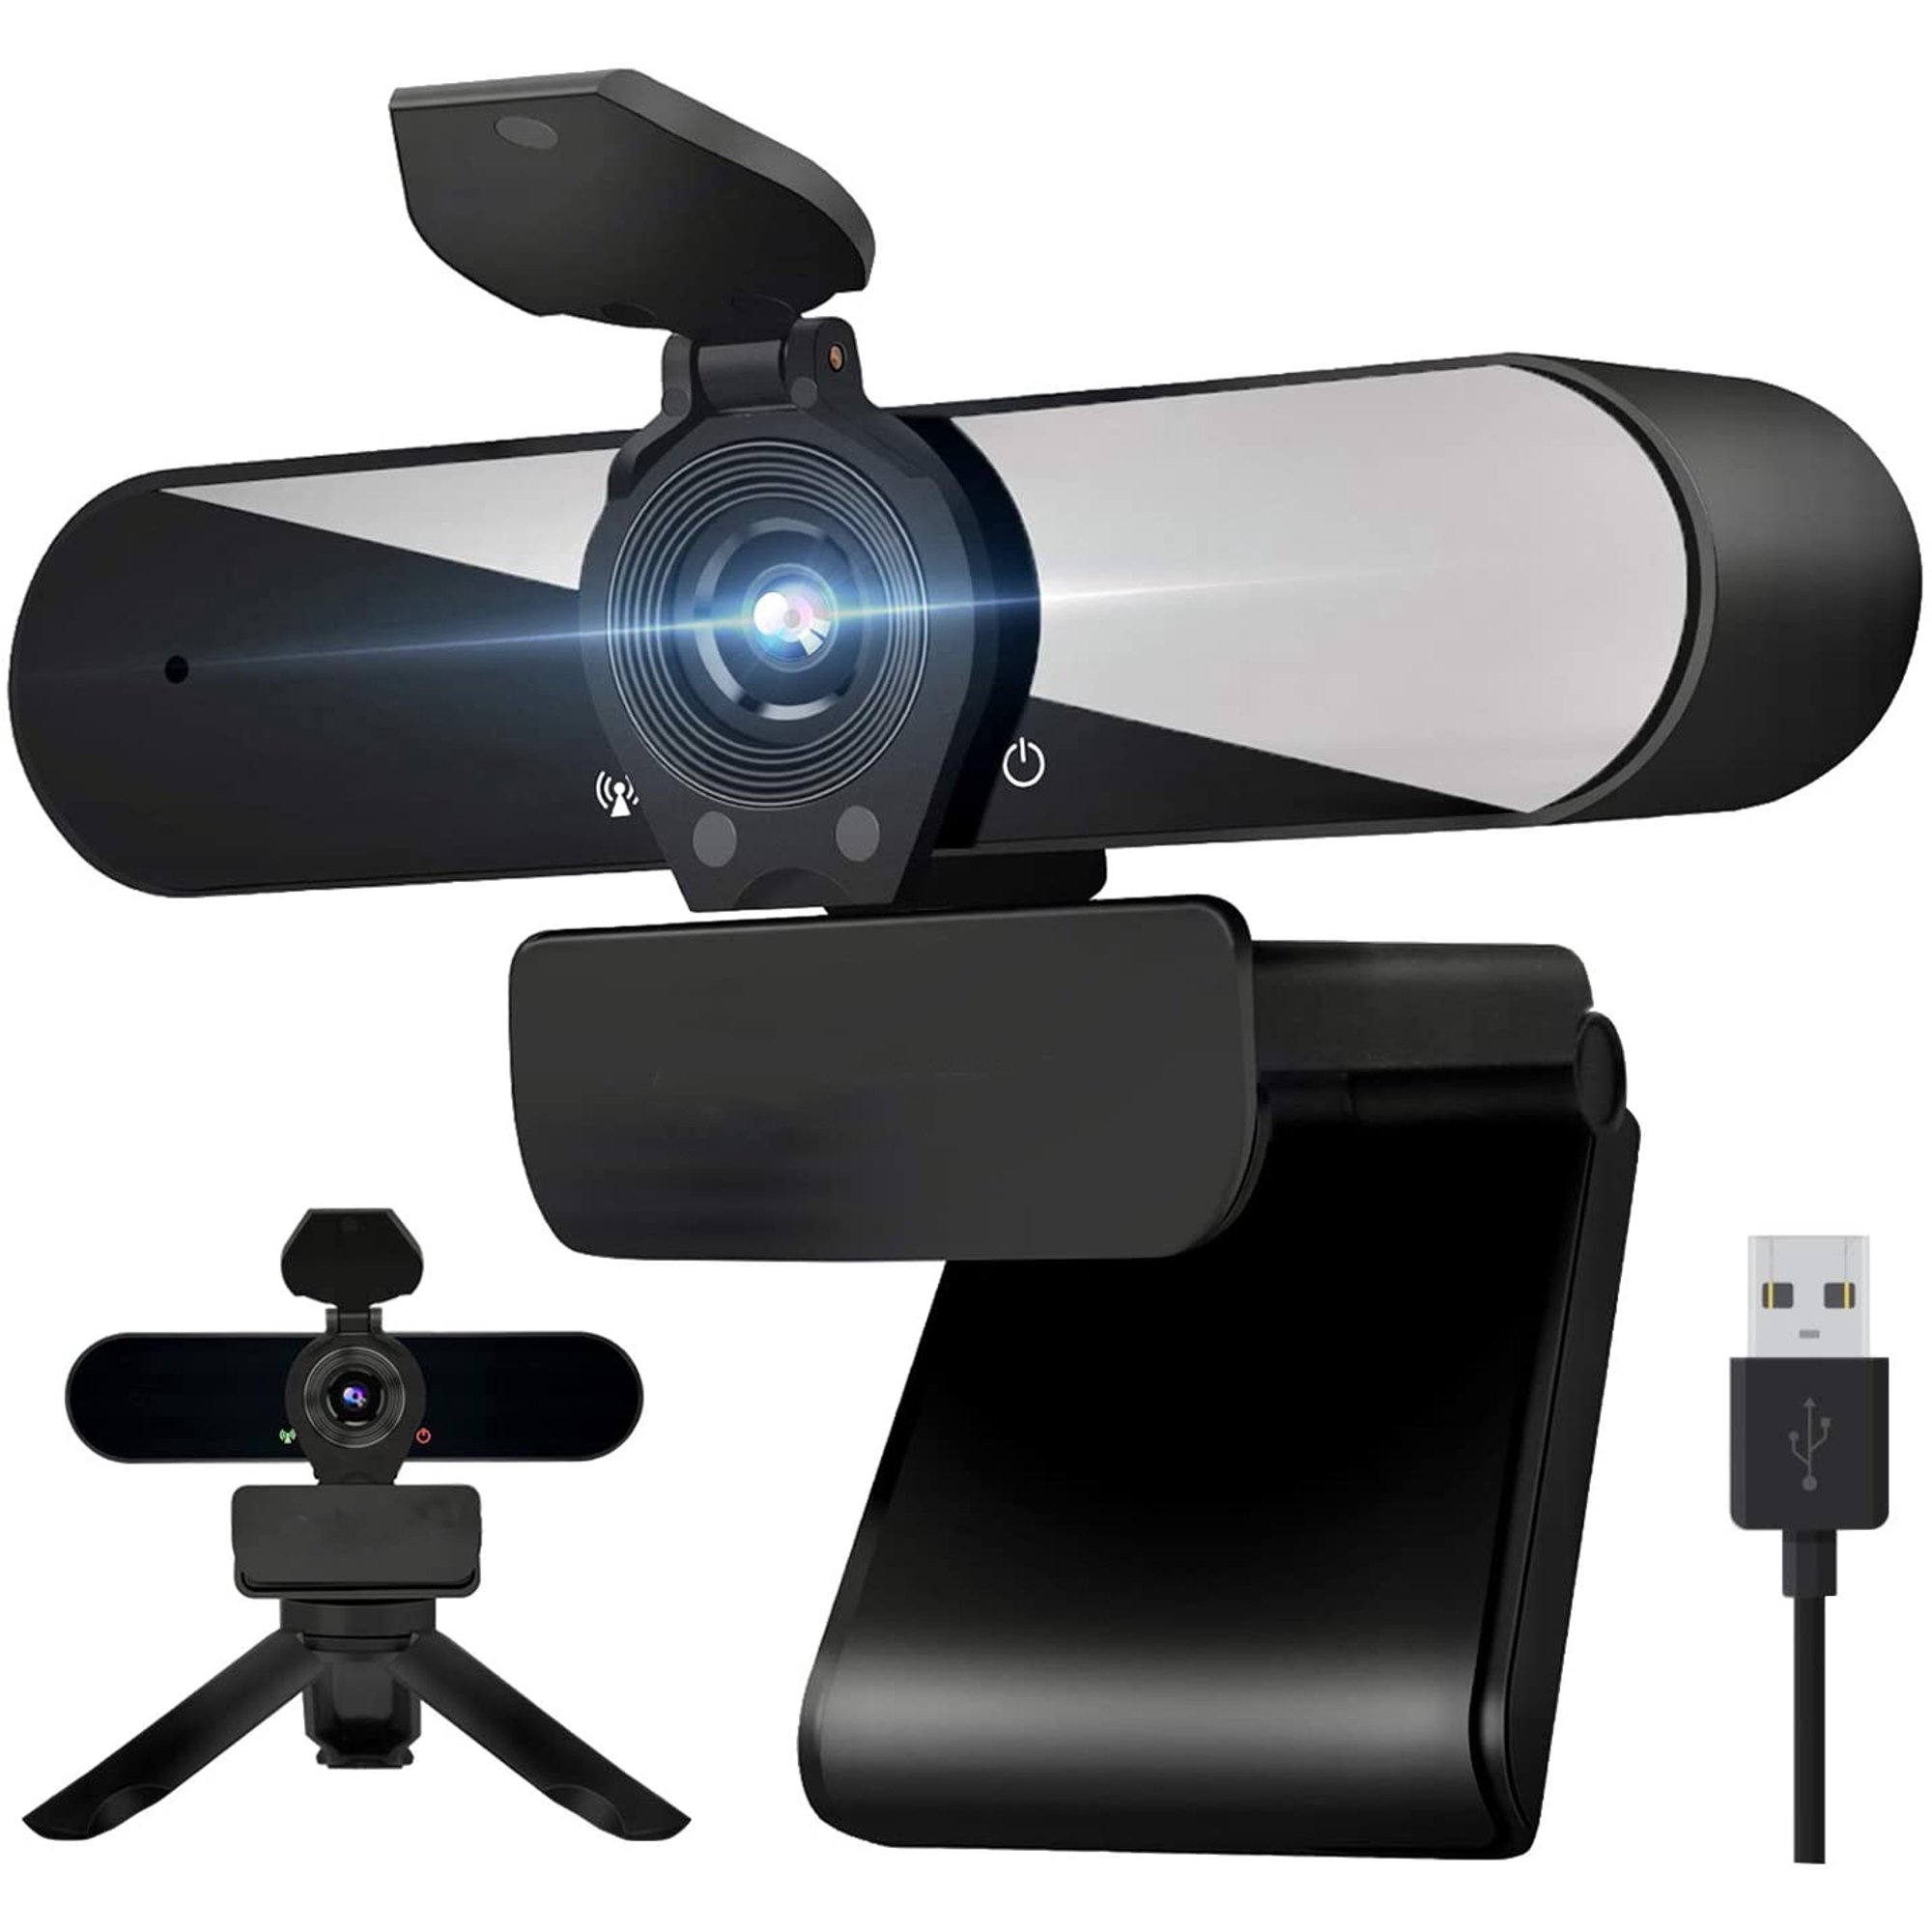 1080P HD Webcam, Computer Camera with Microphone & Tripod, USB Laptop Webcam for PC - image 1 of 9